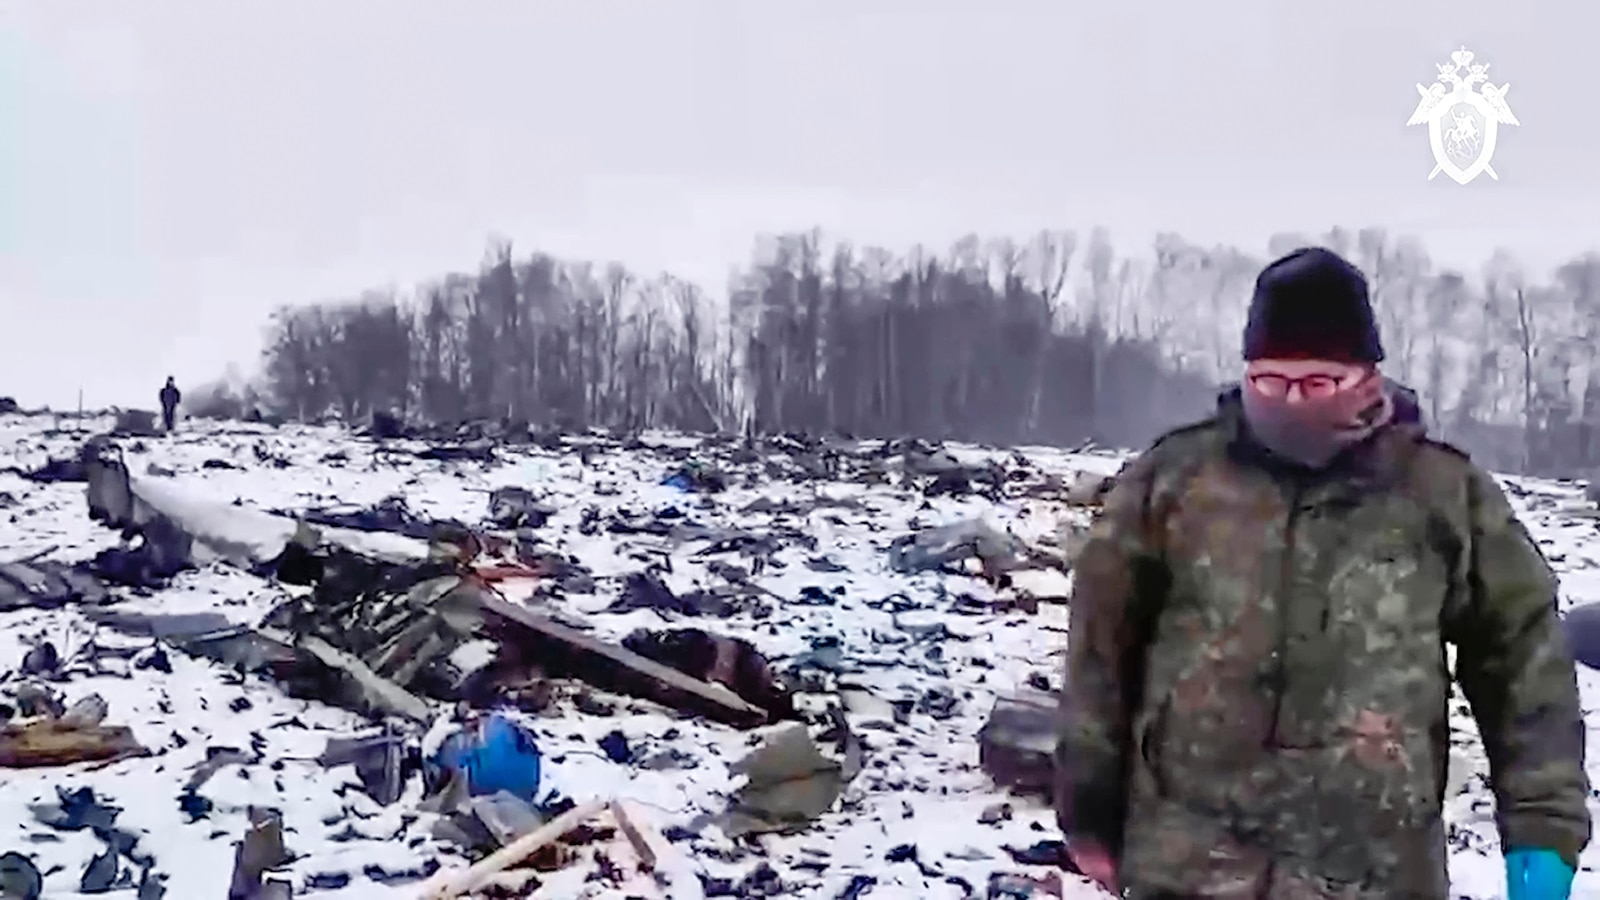 Ukraine's Lack of Evidence Challenges Russia's Claim of Dozens of POWs' Deaths in Plane Crash